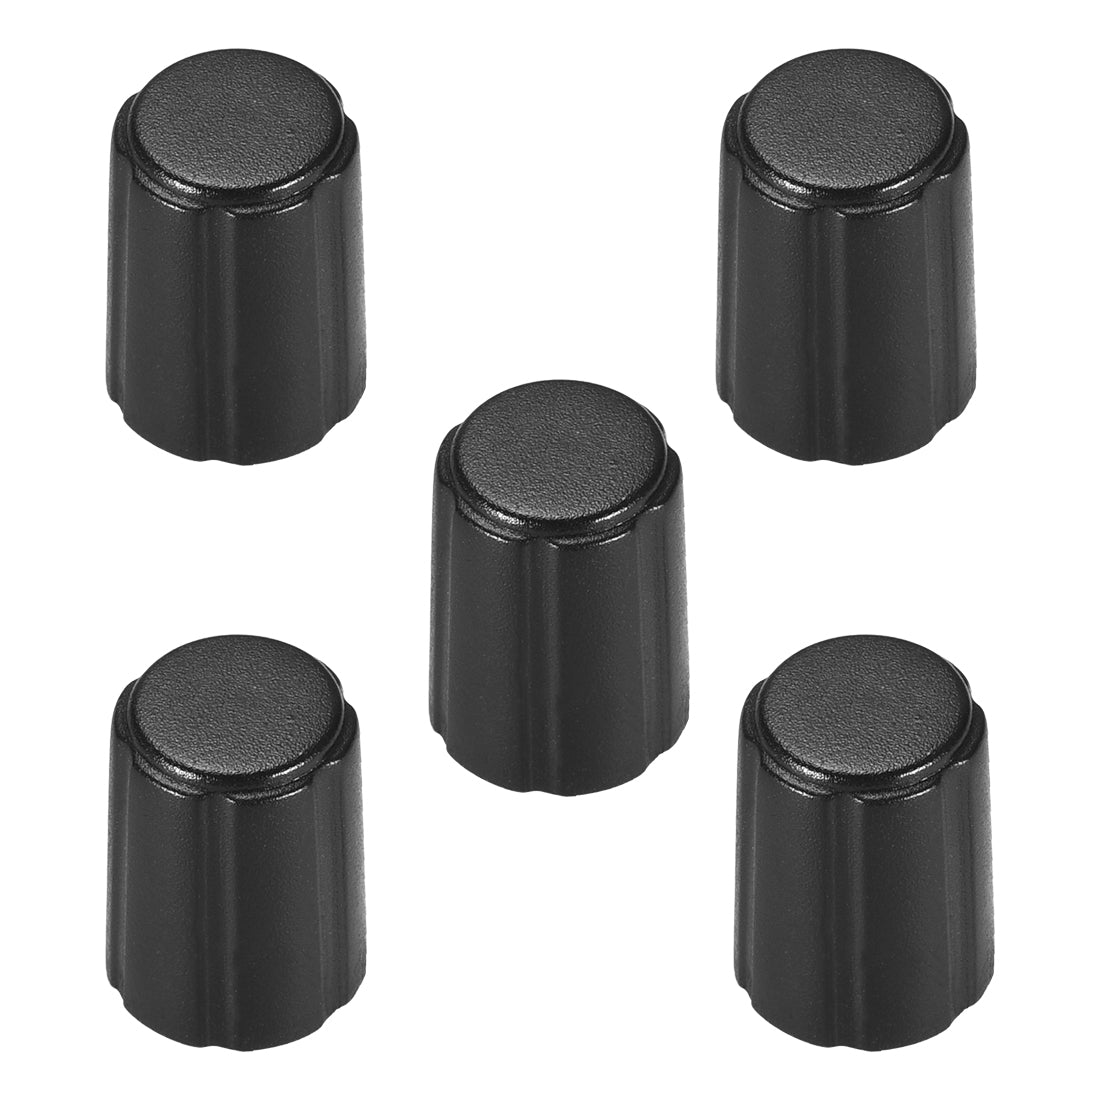 uxcell Uxcell 5pcs,4x6mm Potentiometer Control Knobs for Electric Guitar Volume Tone Black